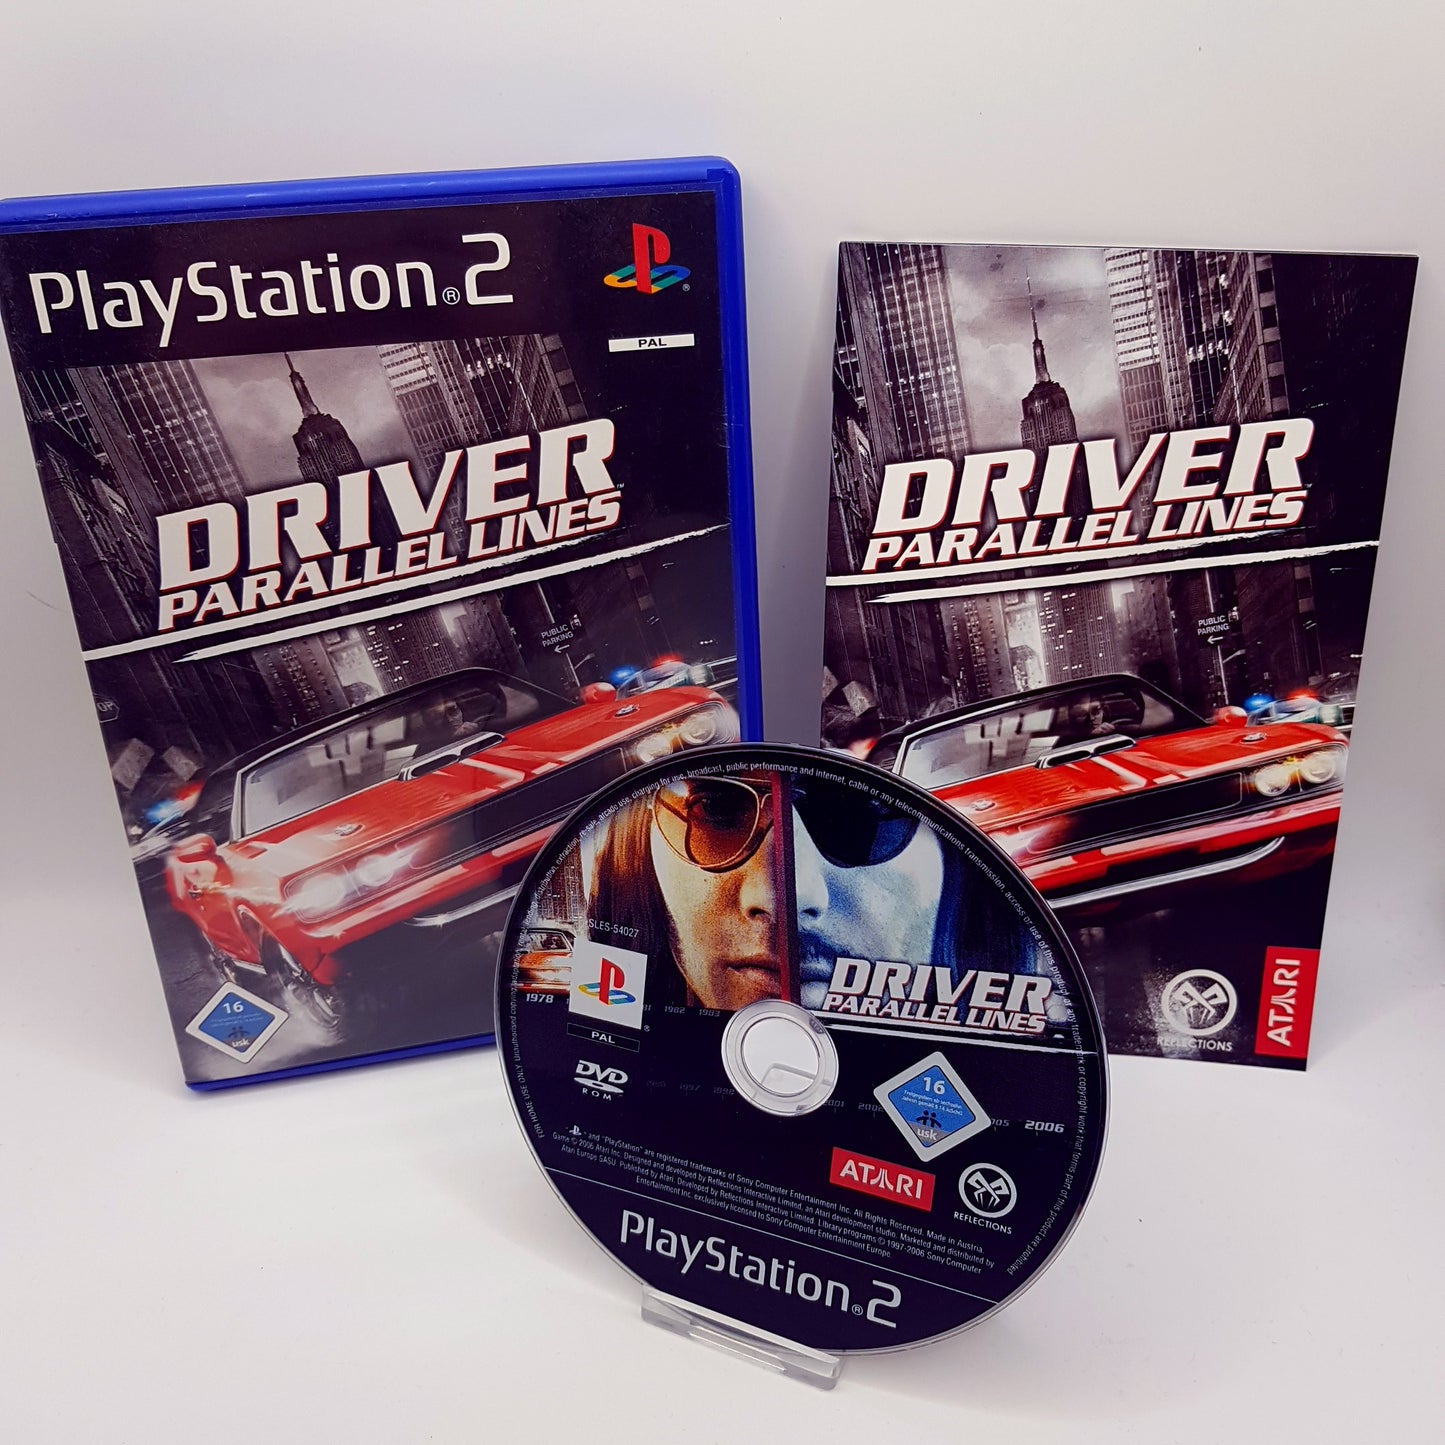 Playstation 2 Ps2 - Driver Parallel Lines - gebraucht